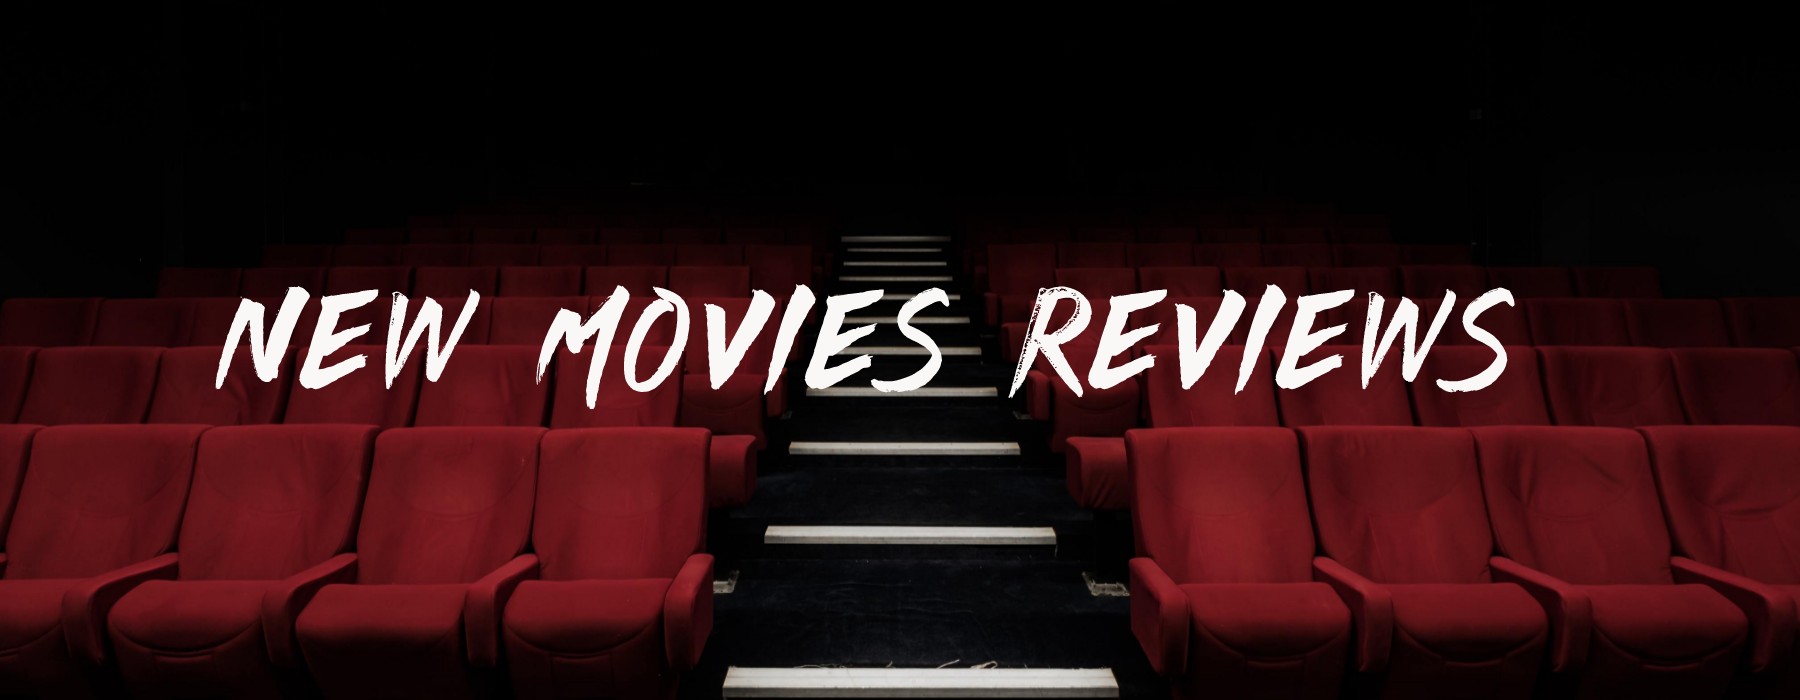 new movies review